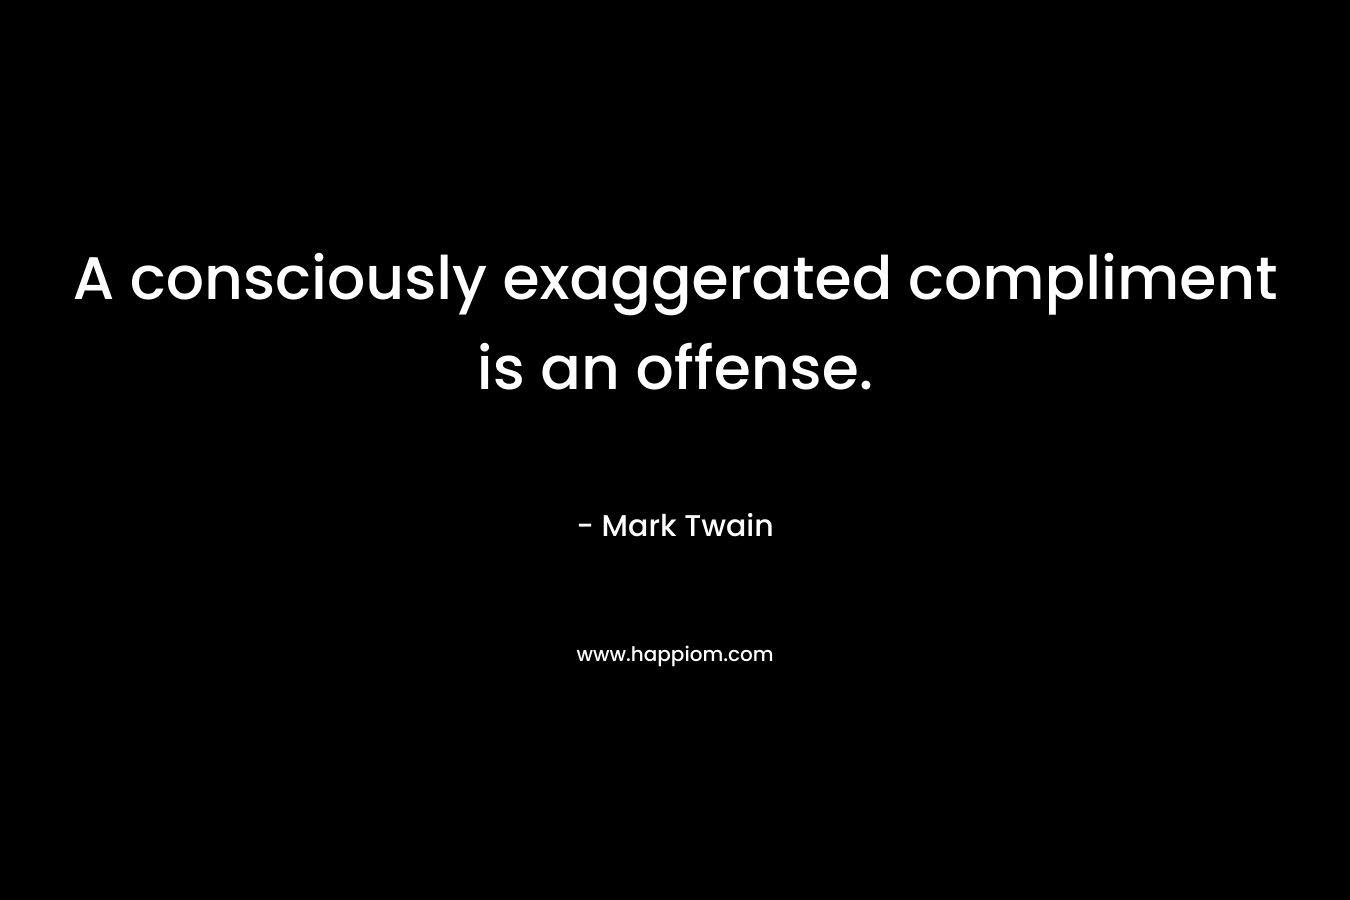 A consciously exaggerated compliment is an offense. – Mark Twain